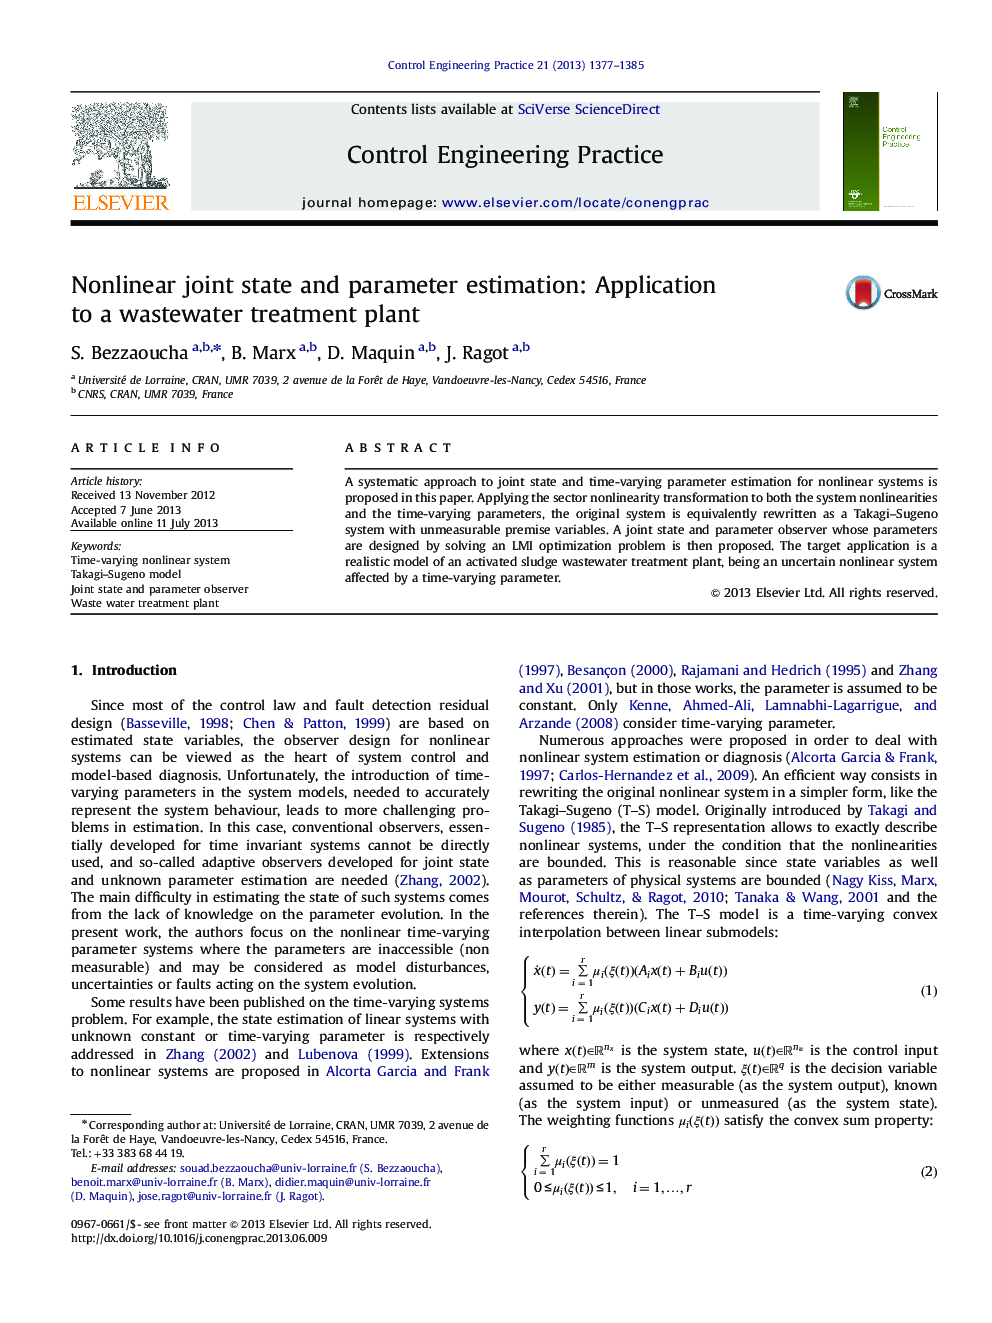 Nonlinear joint state and parameter estimation: Application to a wastewater treatment plant